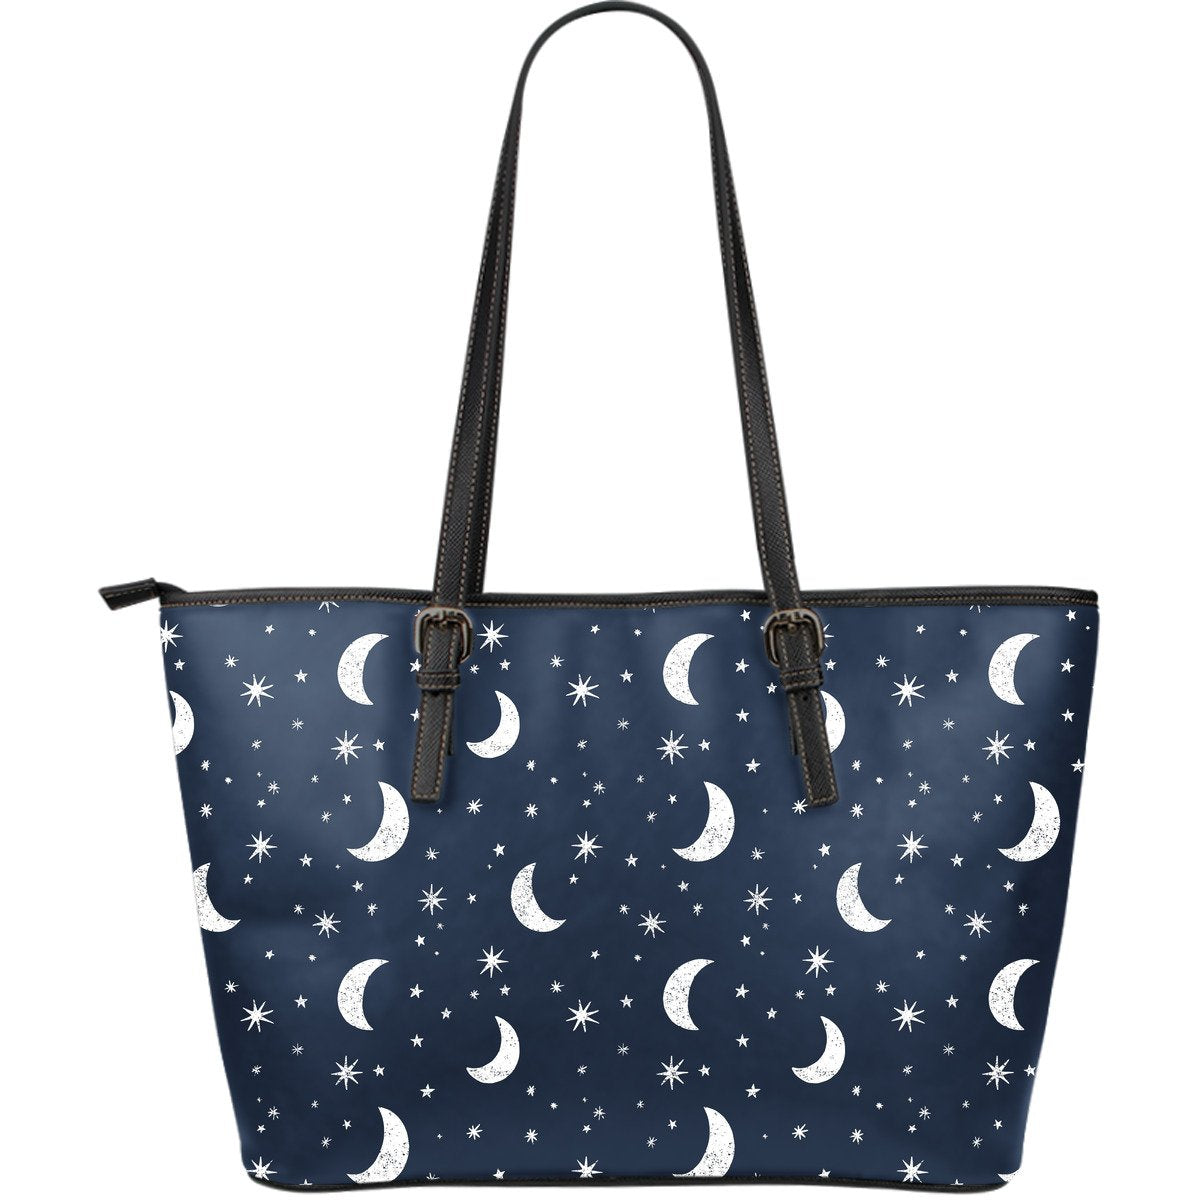 Japan Moon Star Brand Shoes Retro Advertisement Poster Tote Bag by Retro  Posters - Pixels